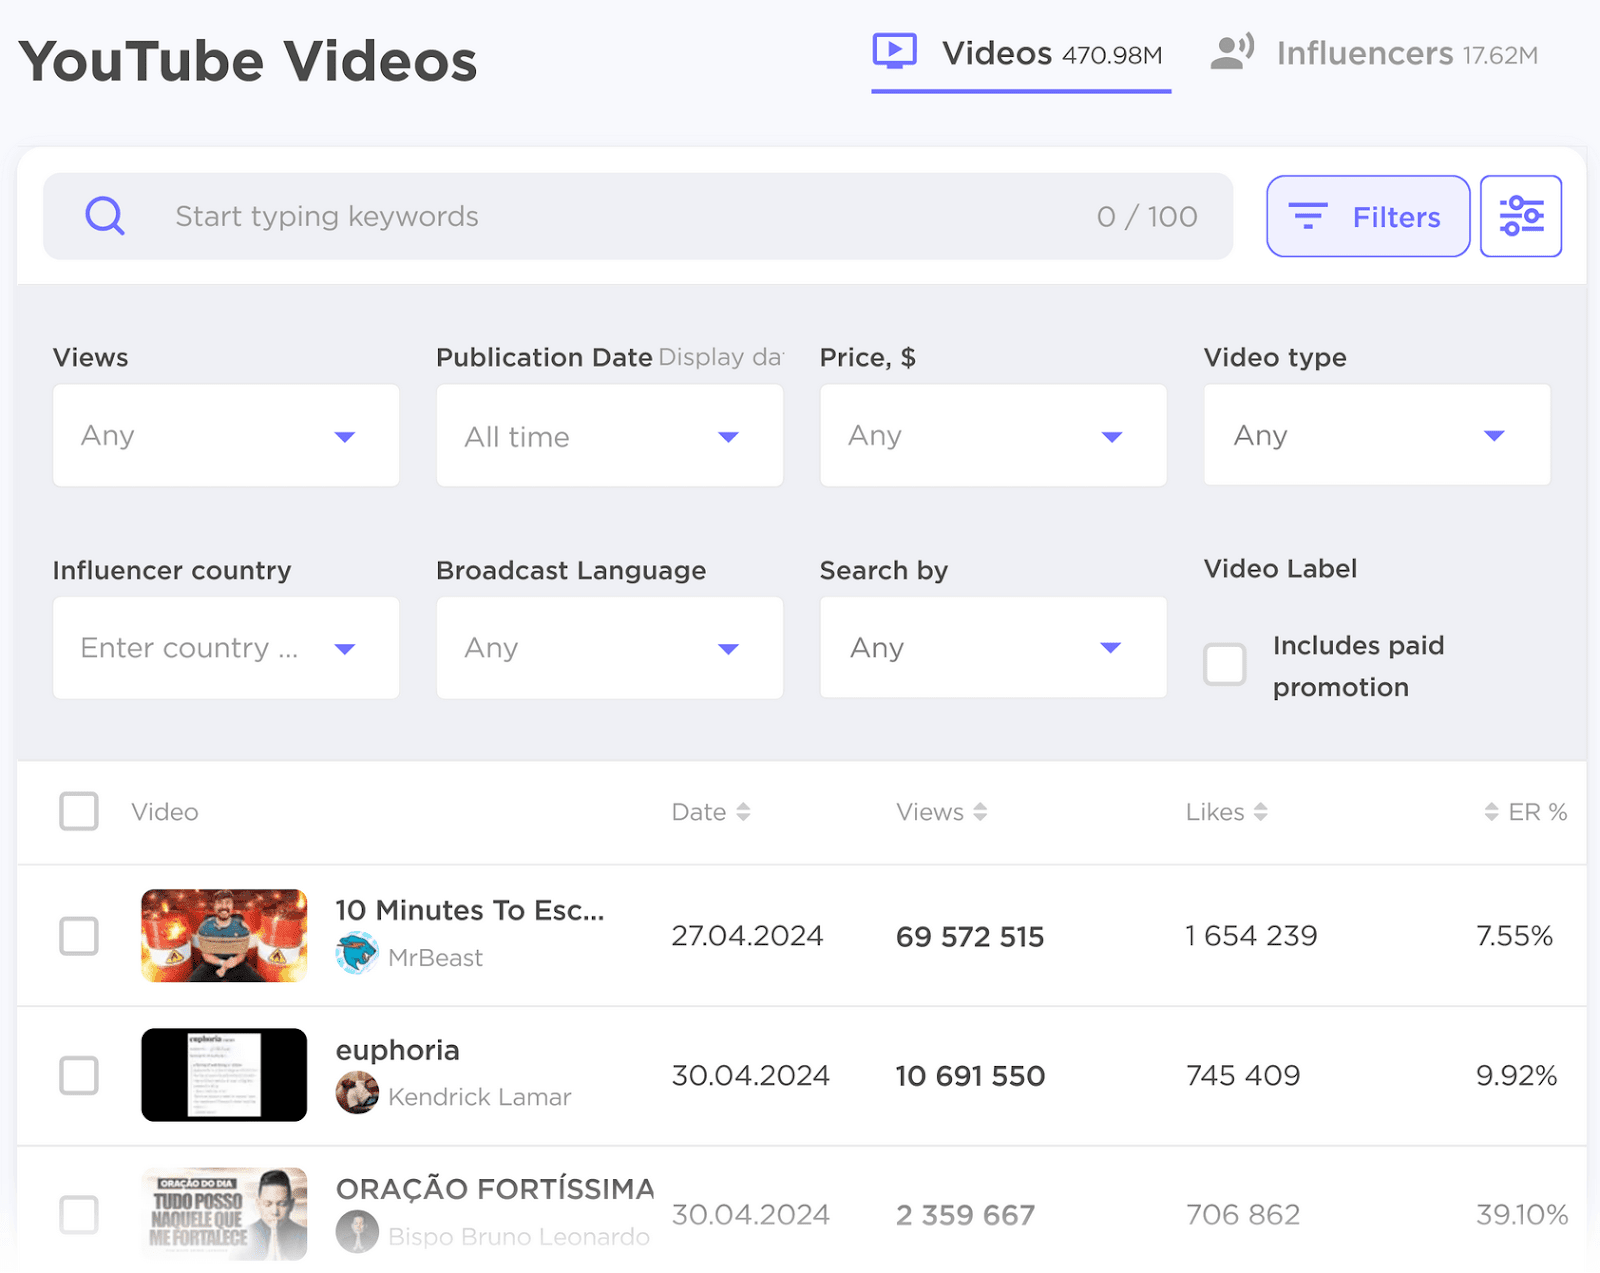 YouTube Videos dashboard with various search and filter options and a list of videos by various creators.